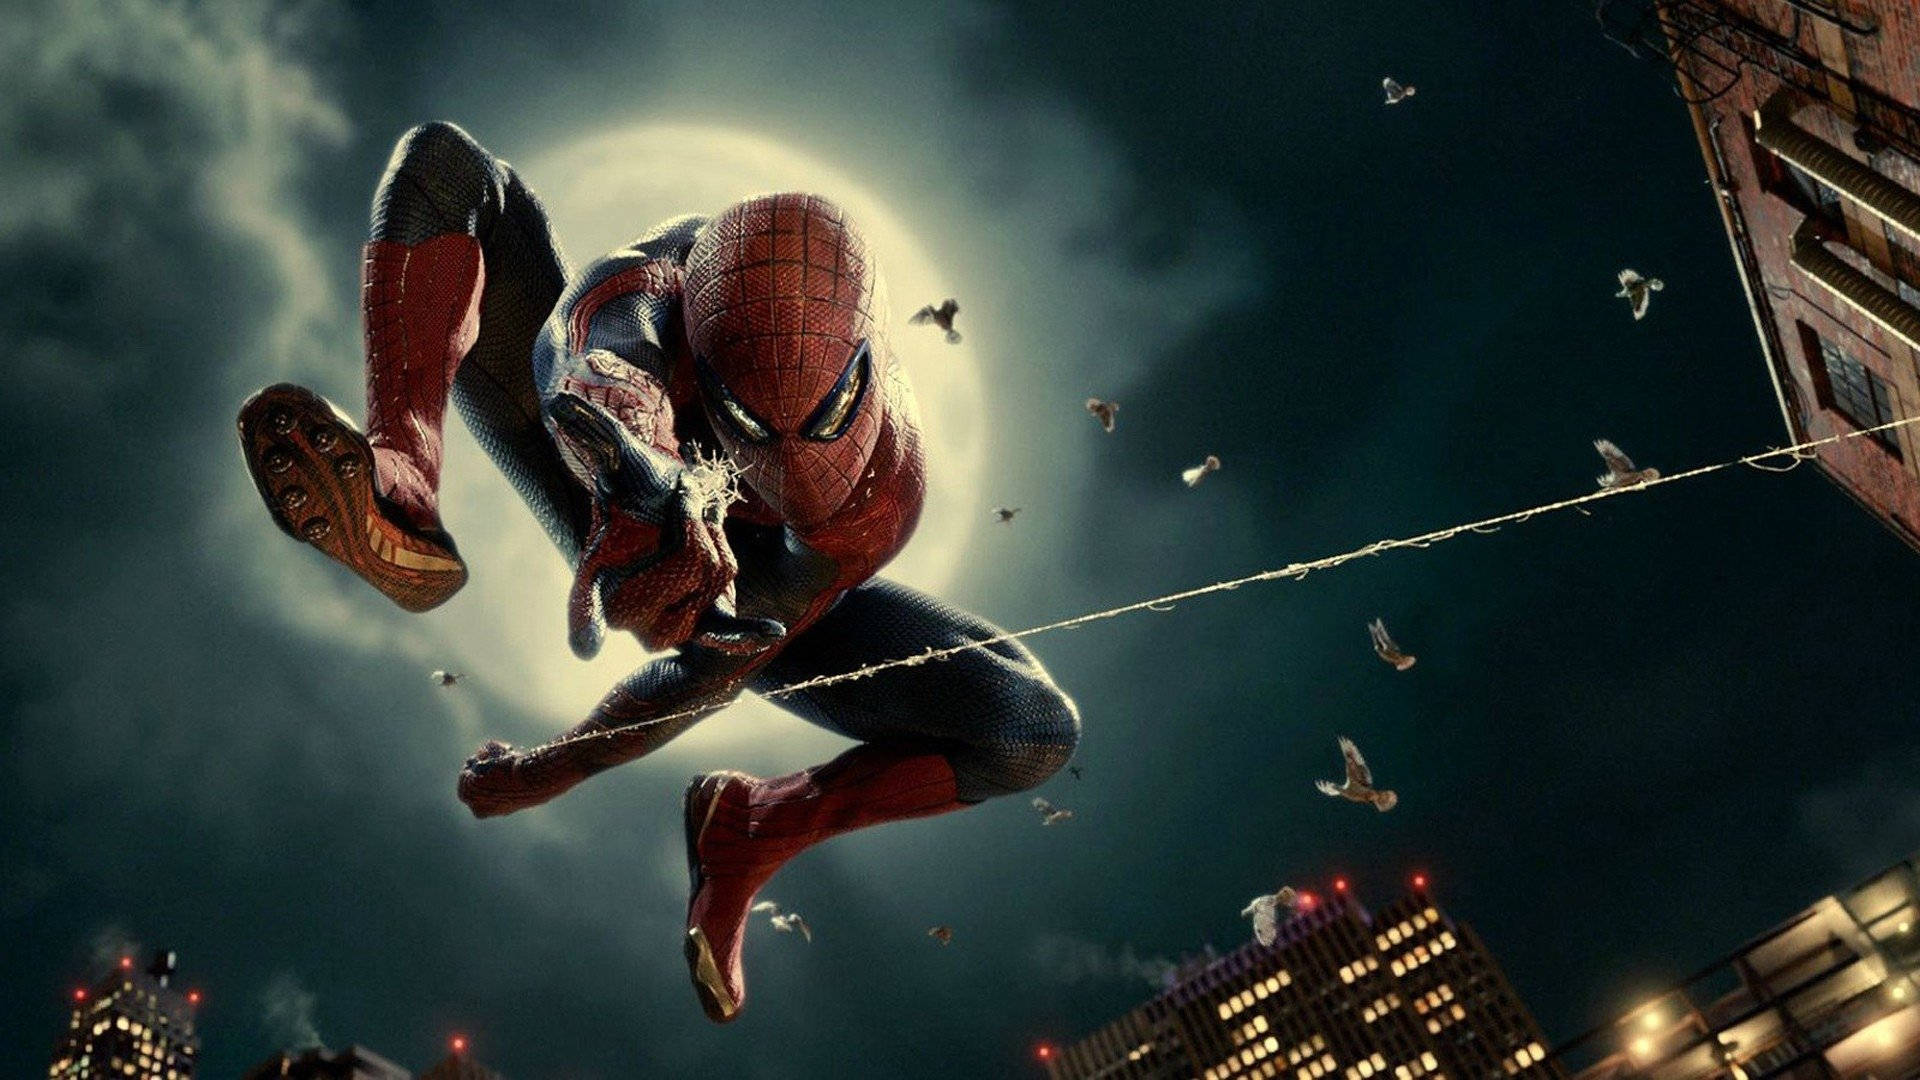 Peter Parker takes on villains as the Amazing Spider-Man Wallpaper